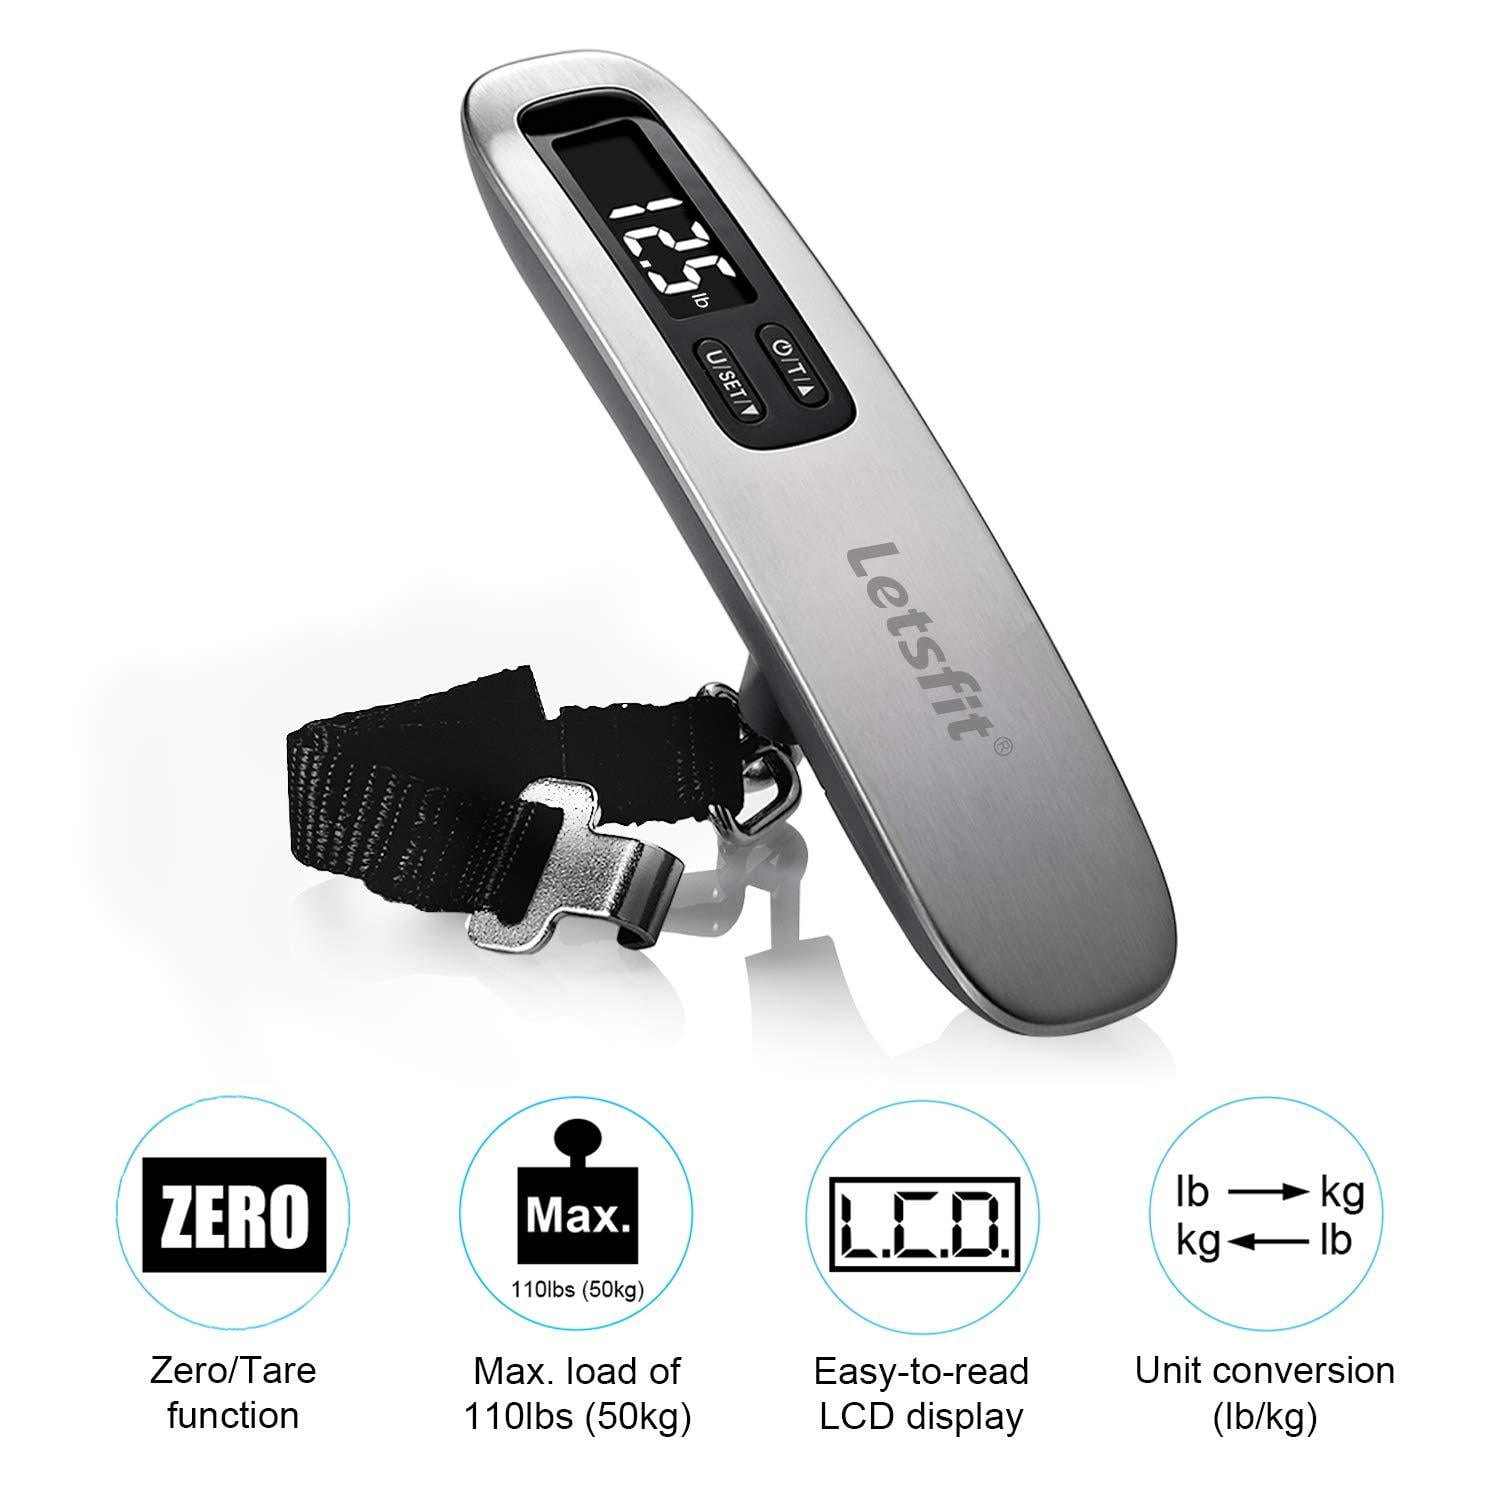 Dropship 5 Core Digital Luggage Scale, Backlight LCD Display With  Temperature Measurement/ Baggage Scale 110lbs Capacity, Portable Stainless  Steel Hanging Scale W/ Tare Function For Travelers- LSS-004 to Sell Online  at a